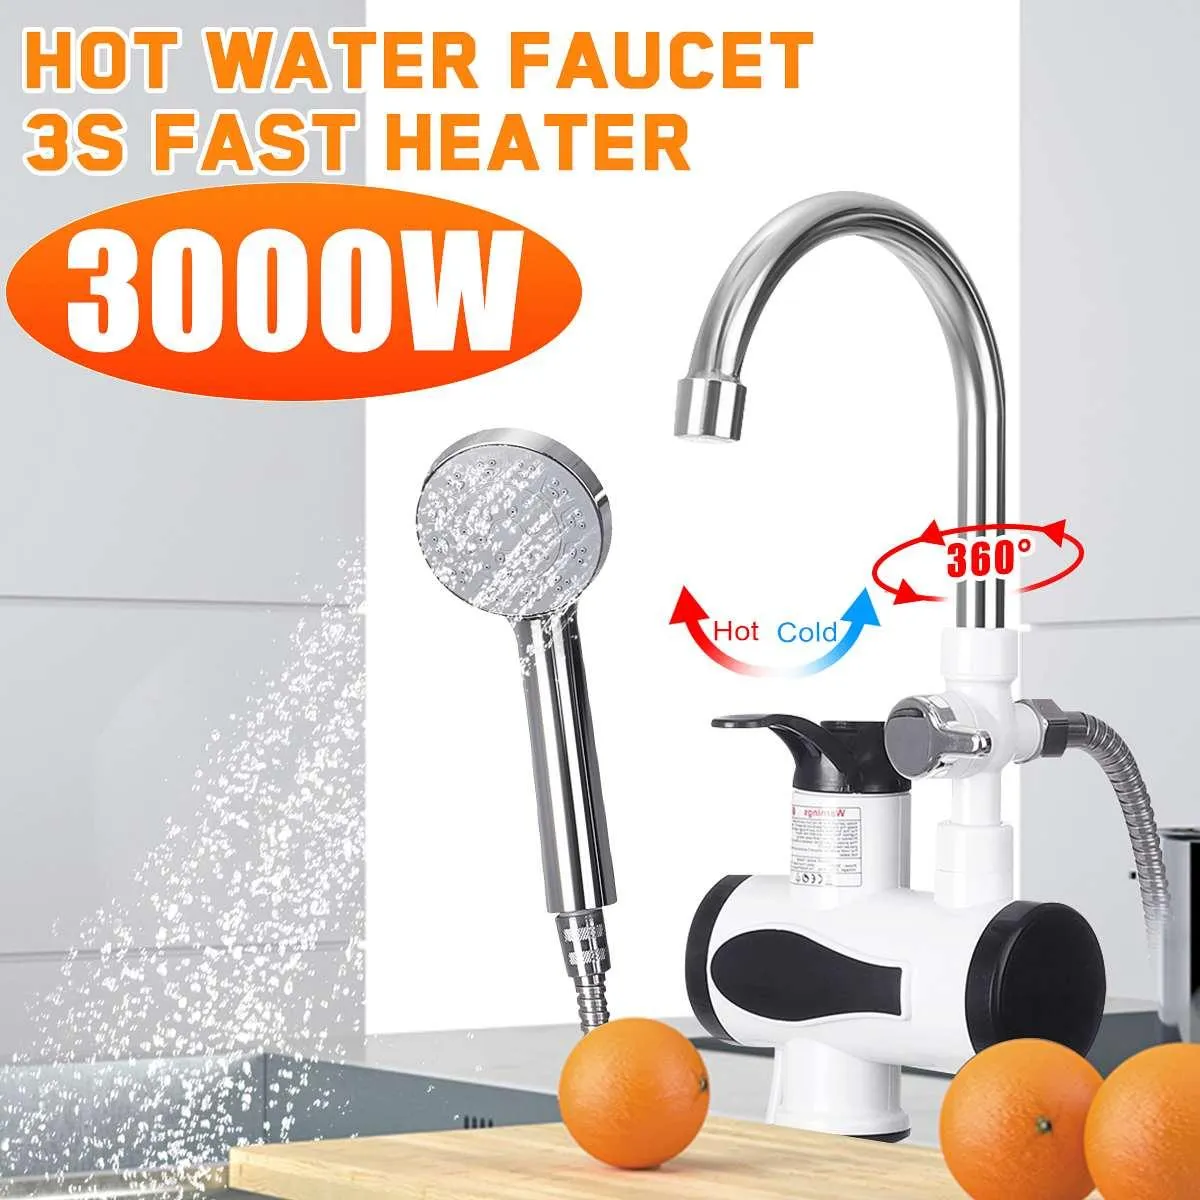 Heaters 3000W Electric Instant Hot Water Faucet Water heater Fast heating with LED Temperature Display Tankless Tap For Kitchen shower